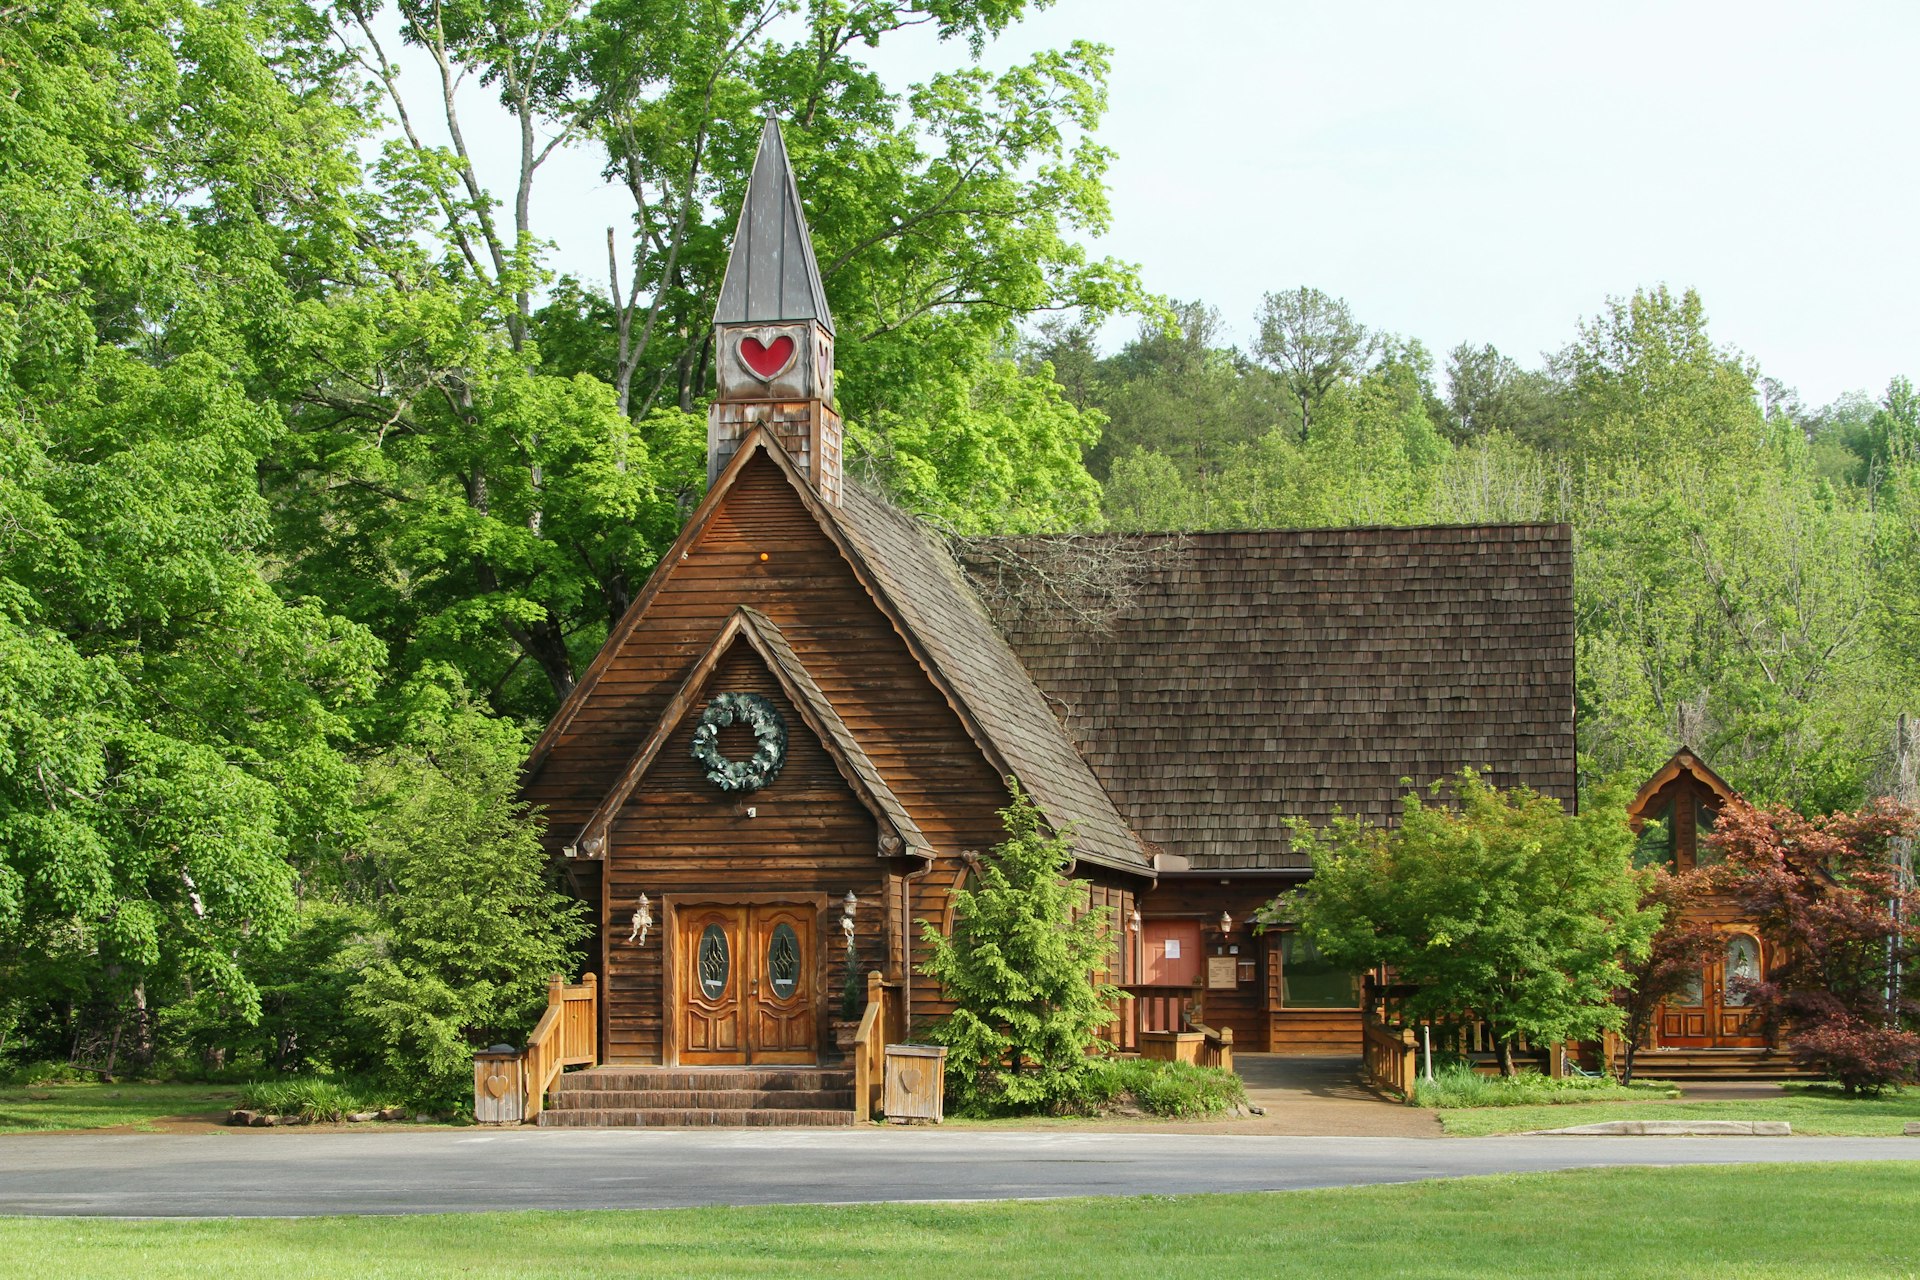 The exterior wooden facade of the Wedding Chapel surrounded by tall trees